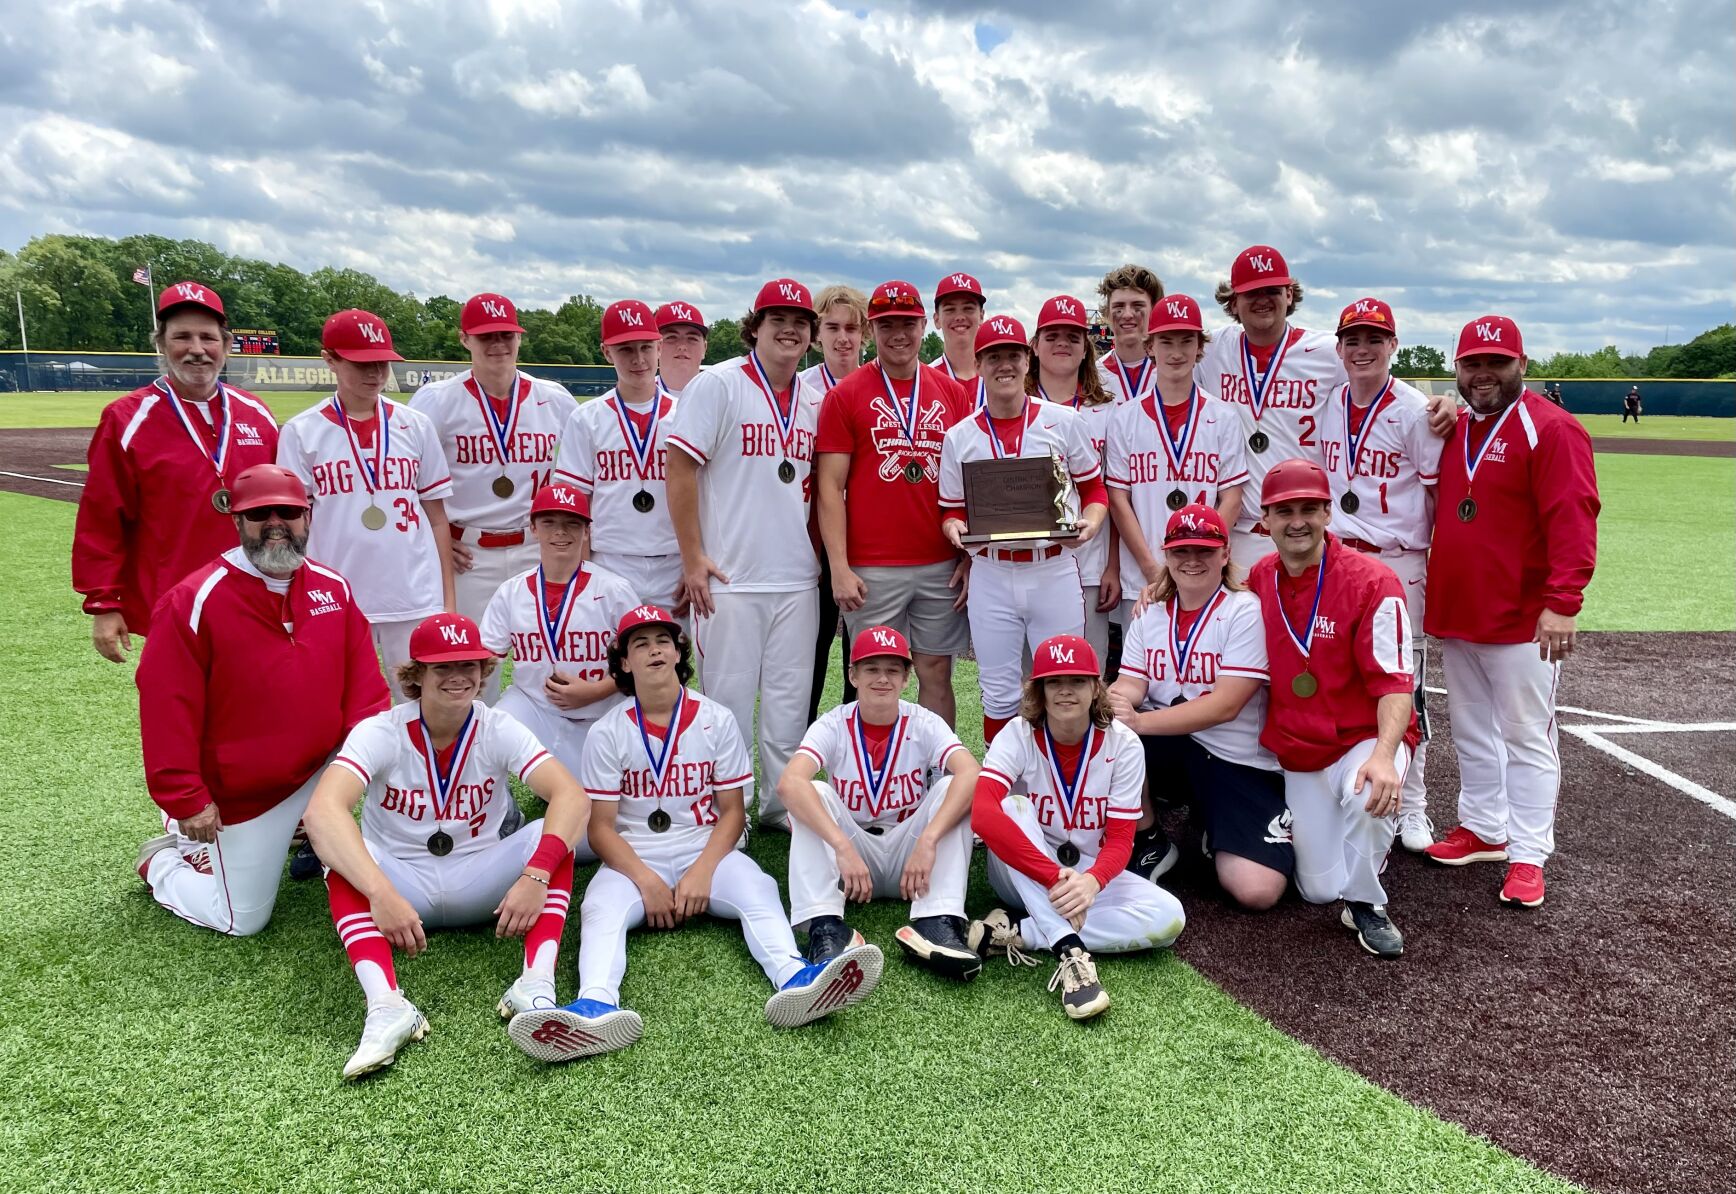 West Middlesex Clinches 3rd Consecutive D-10 Title in Dramatic Win over Saegertown